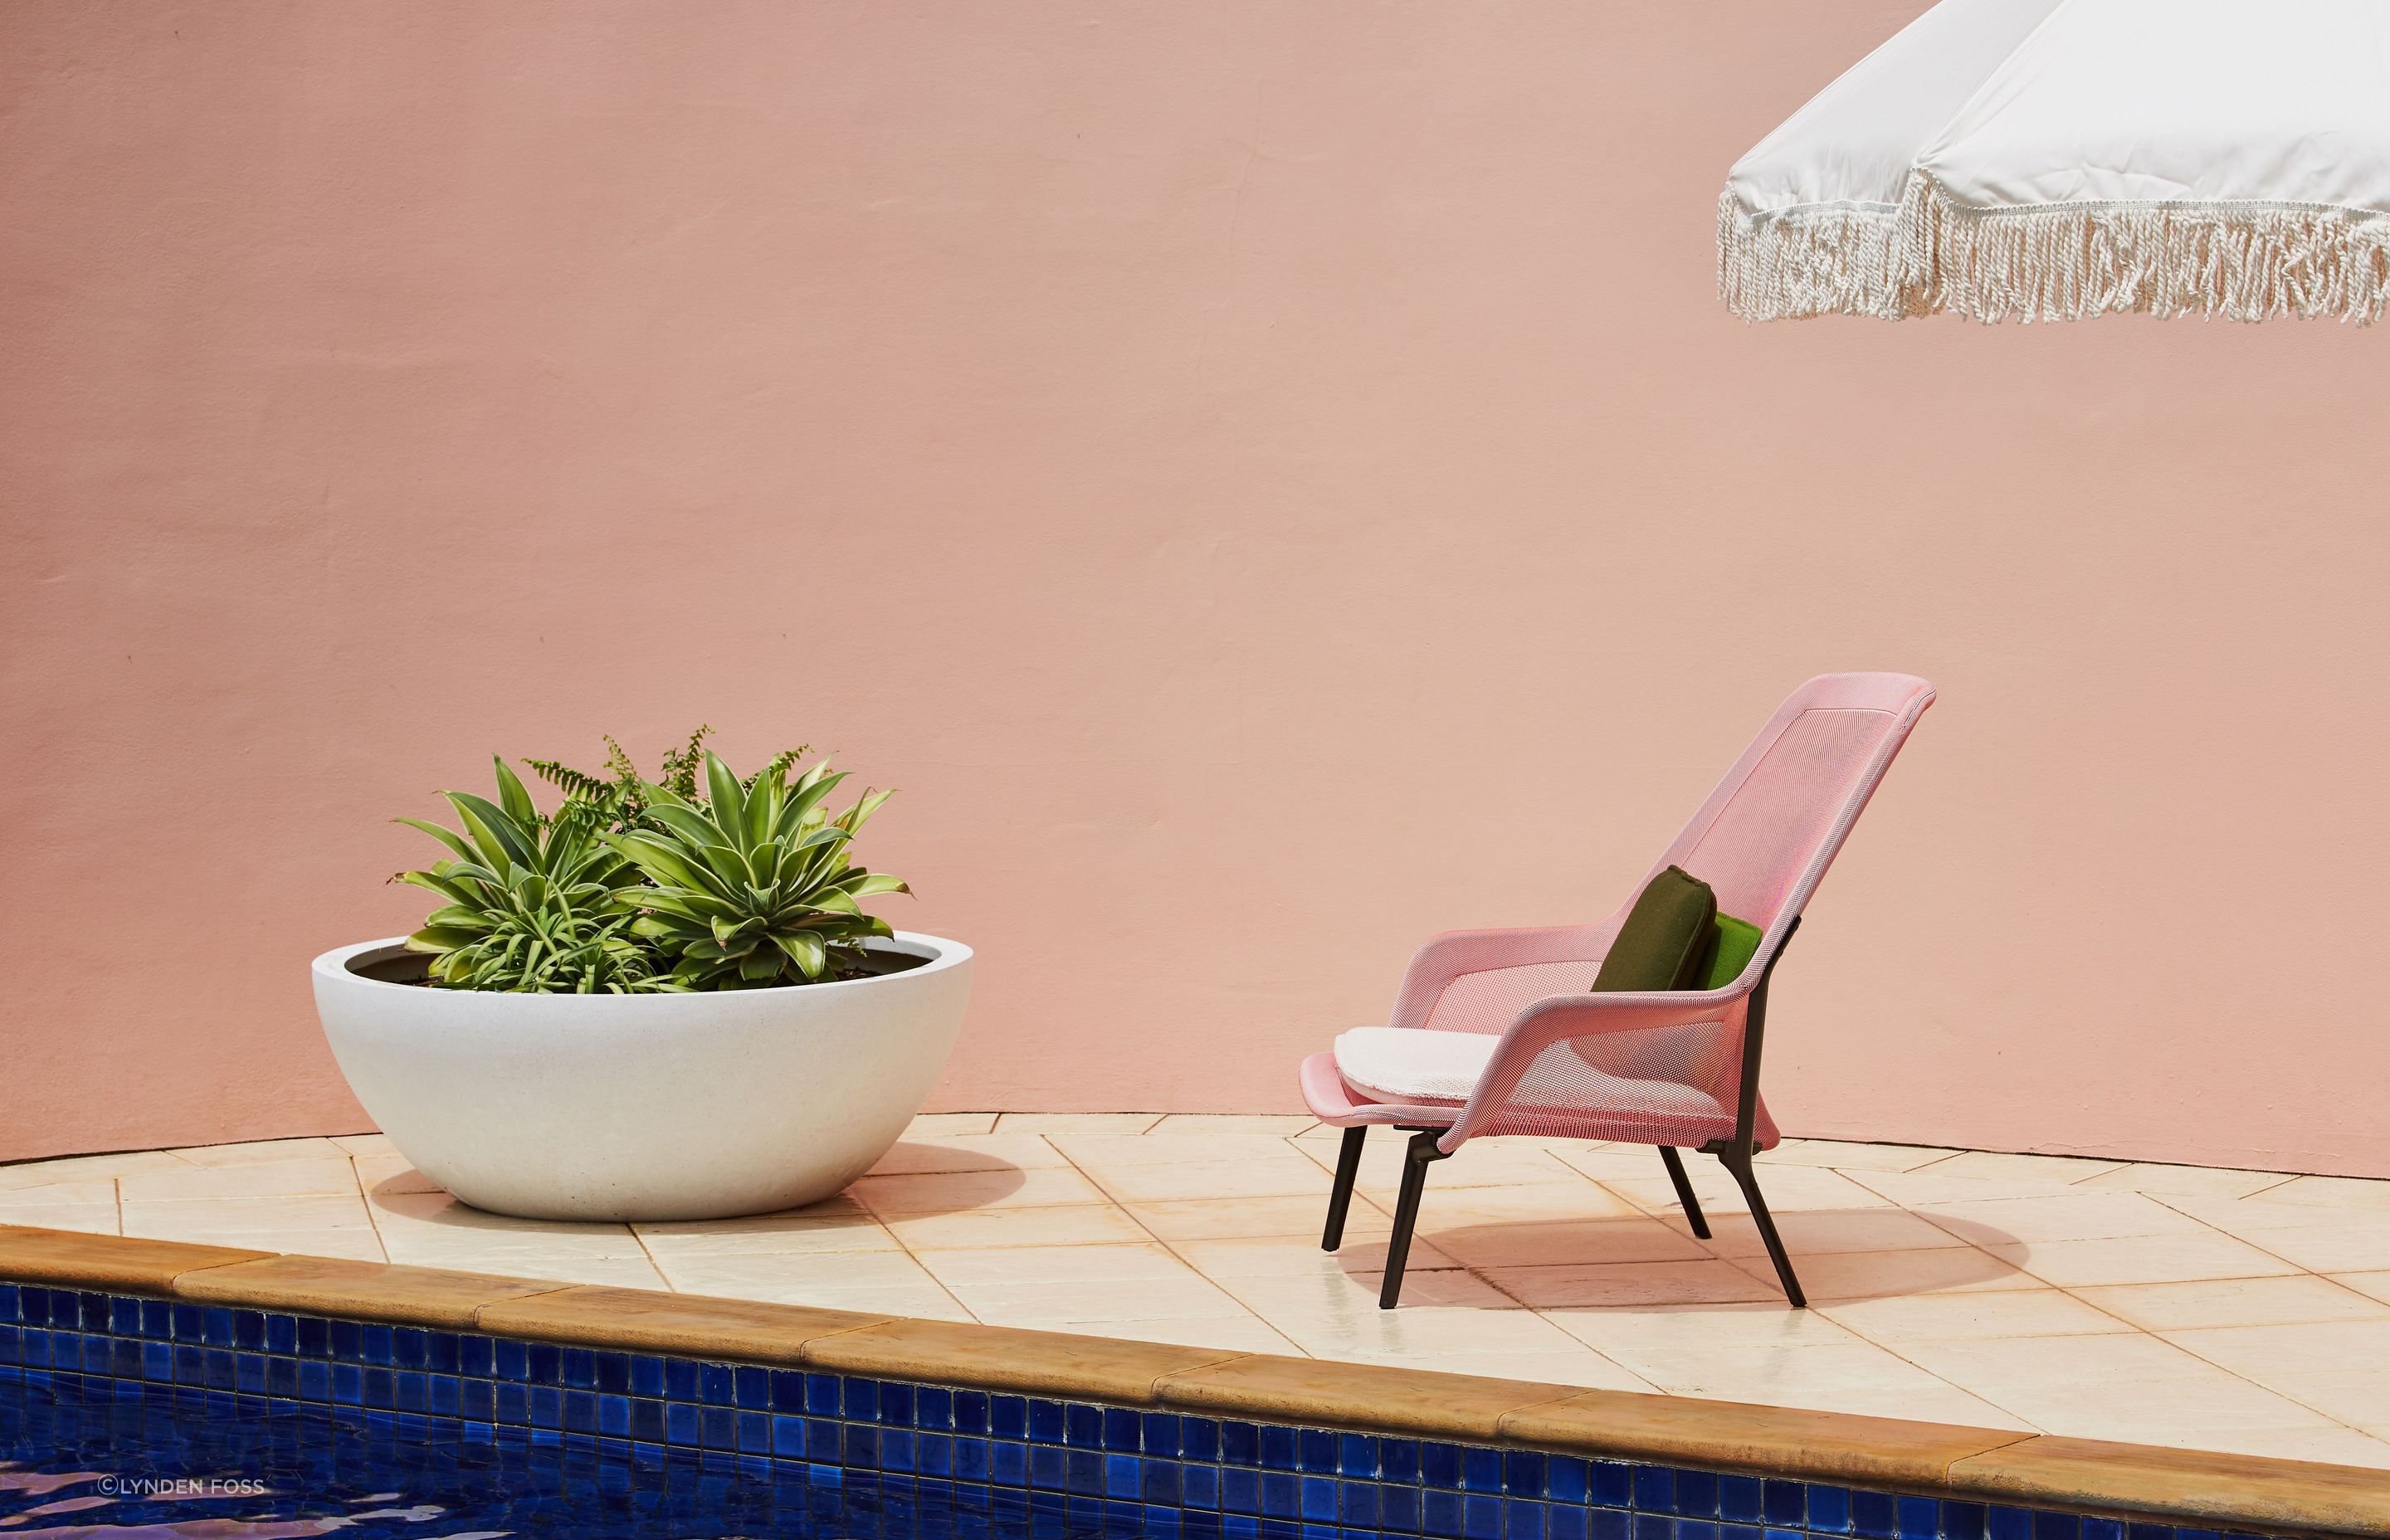 The wall wrapping around the outdoor spaces was painted in a soft dirty pink and gives off a real holiday vibe.